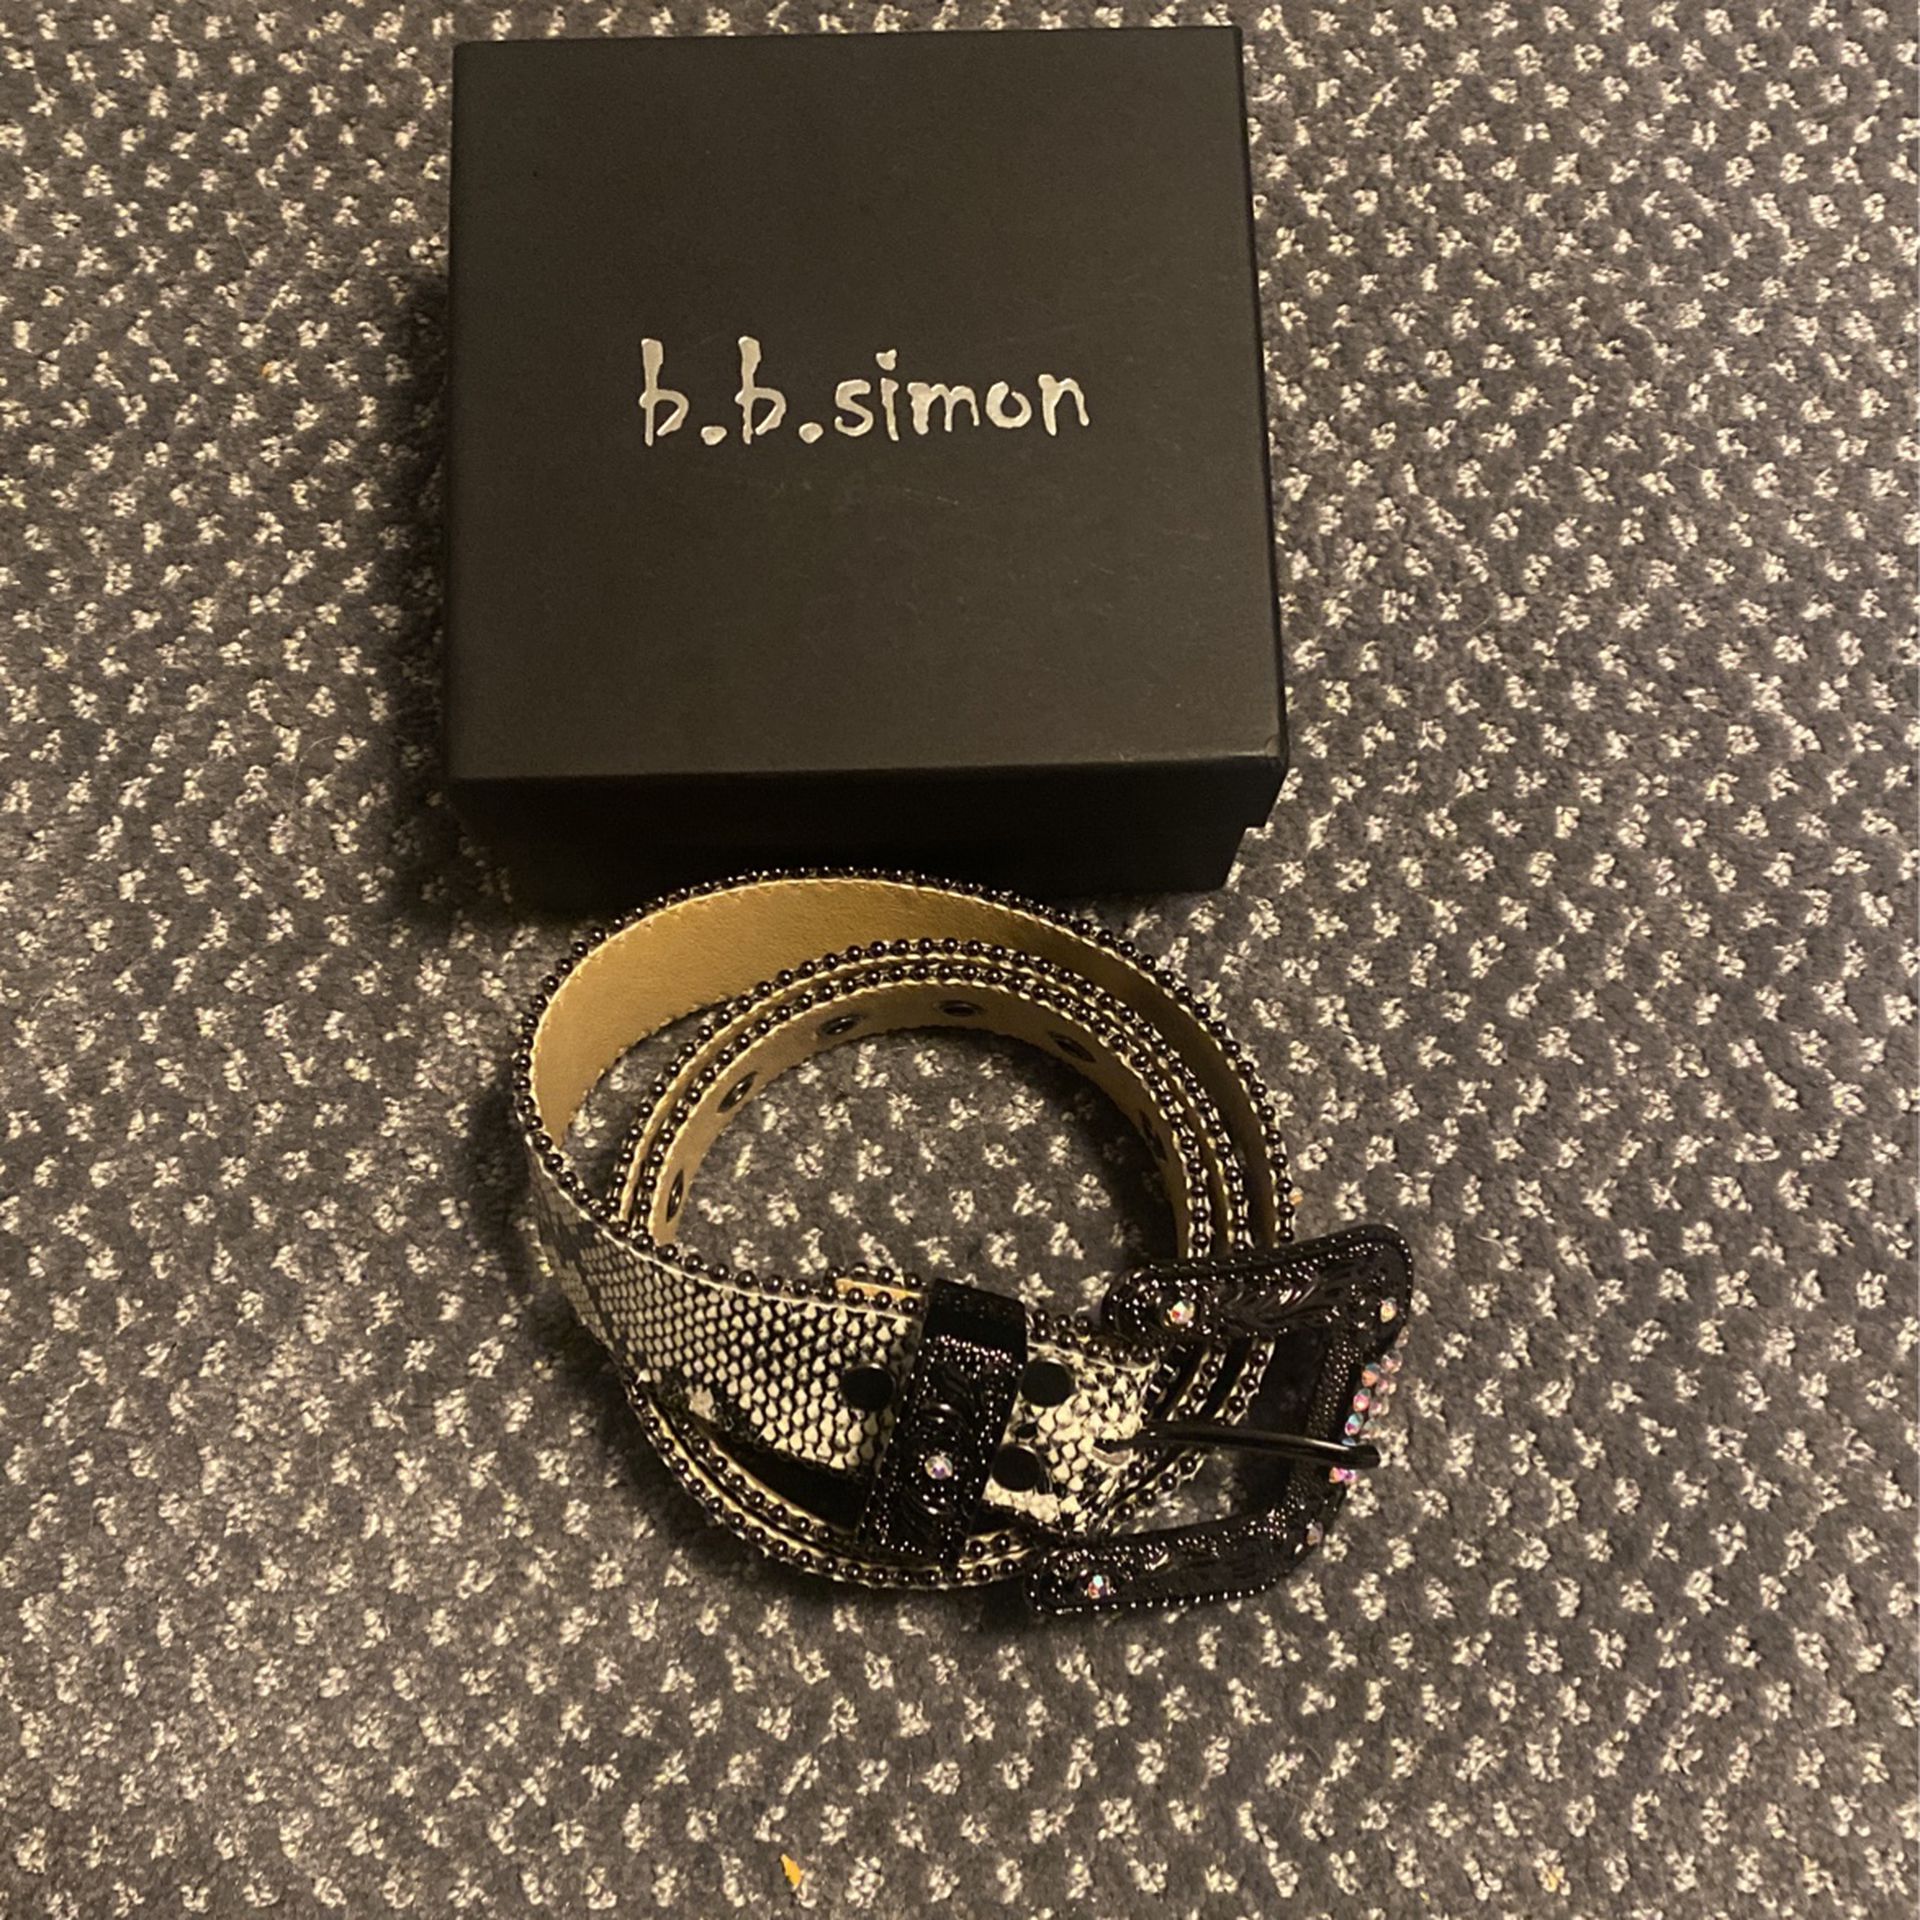 BB.Simon Belt With Box. for Sale in Colorado Springs, CO - OfferUp